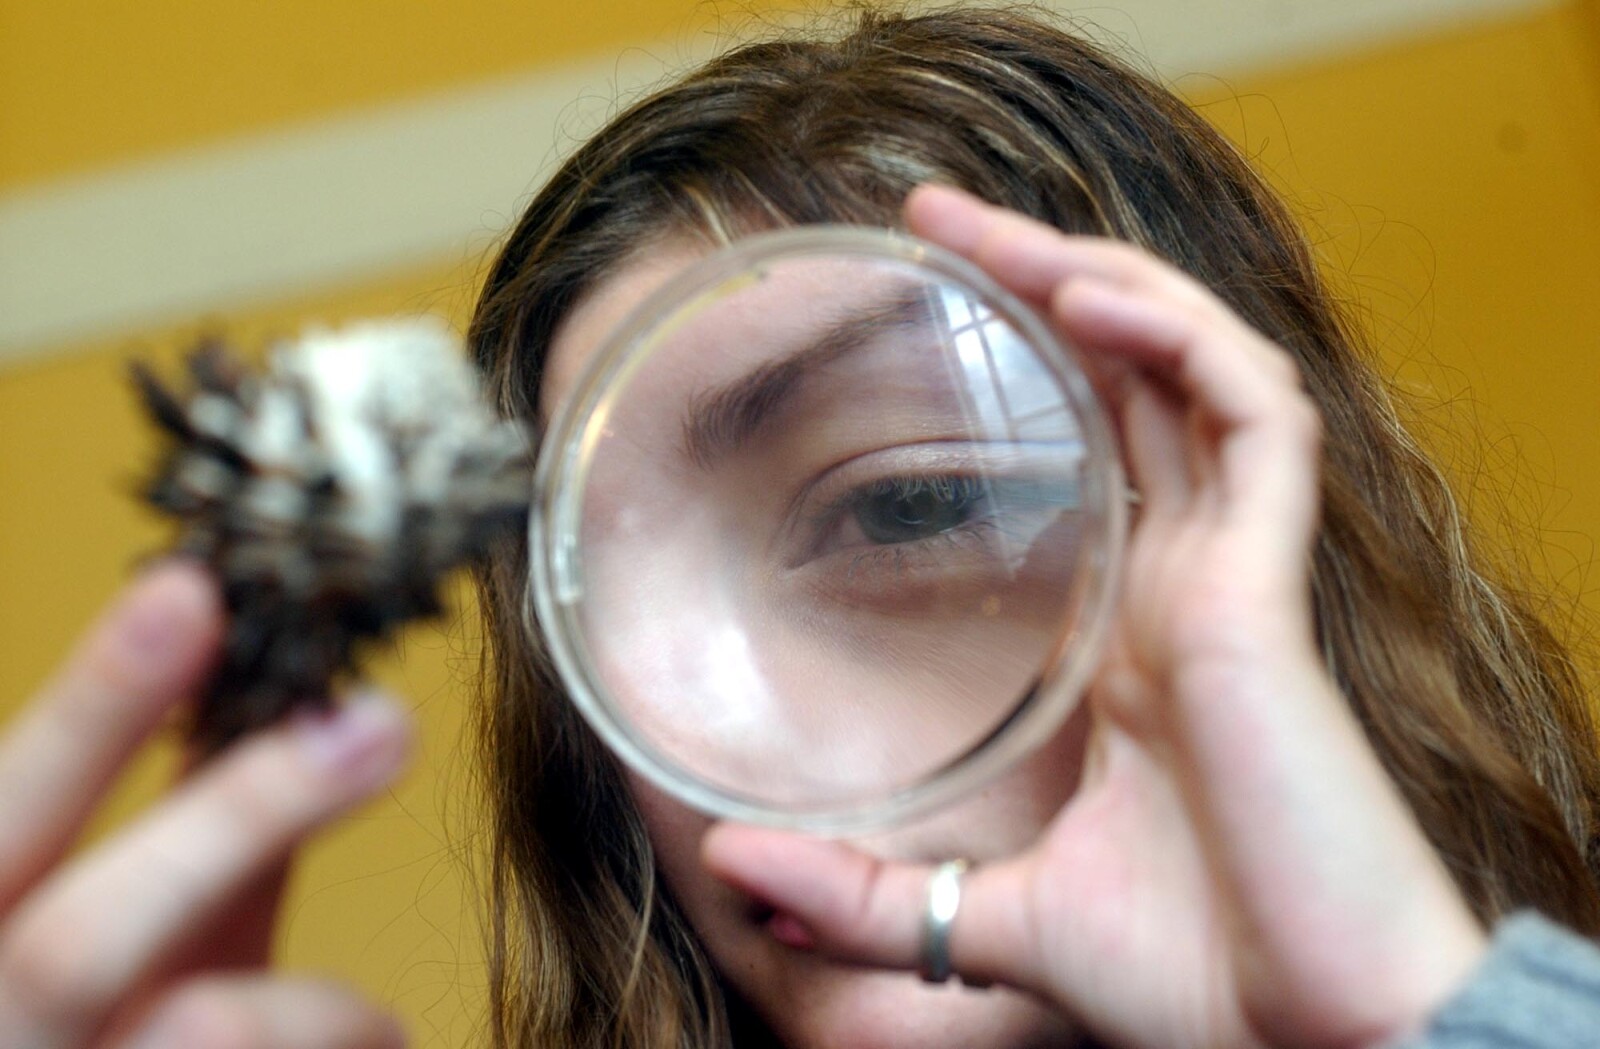 A girl looking at a shell through a magnifying glass.